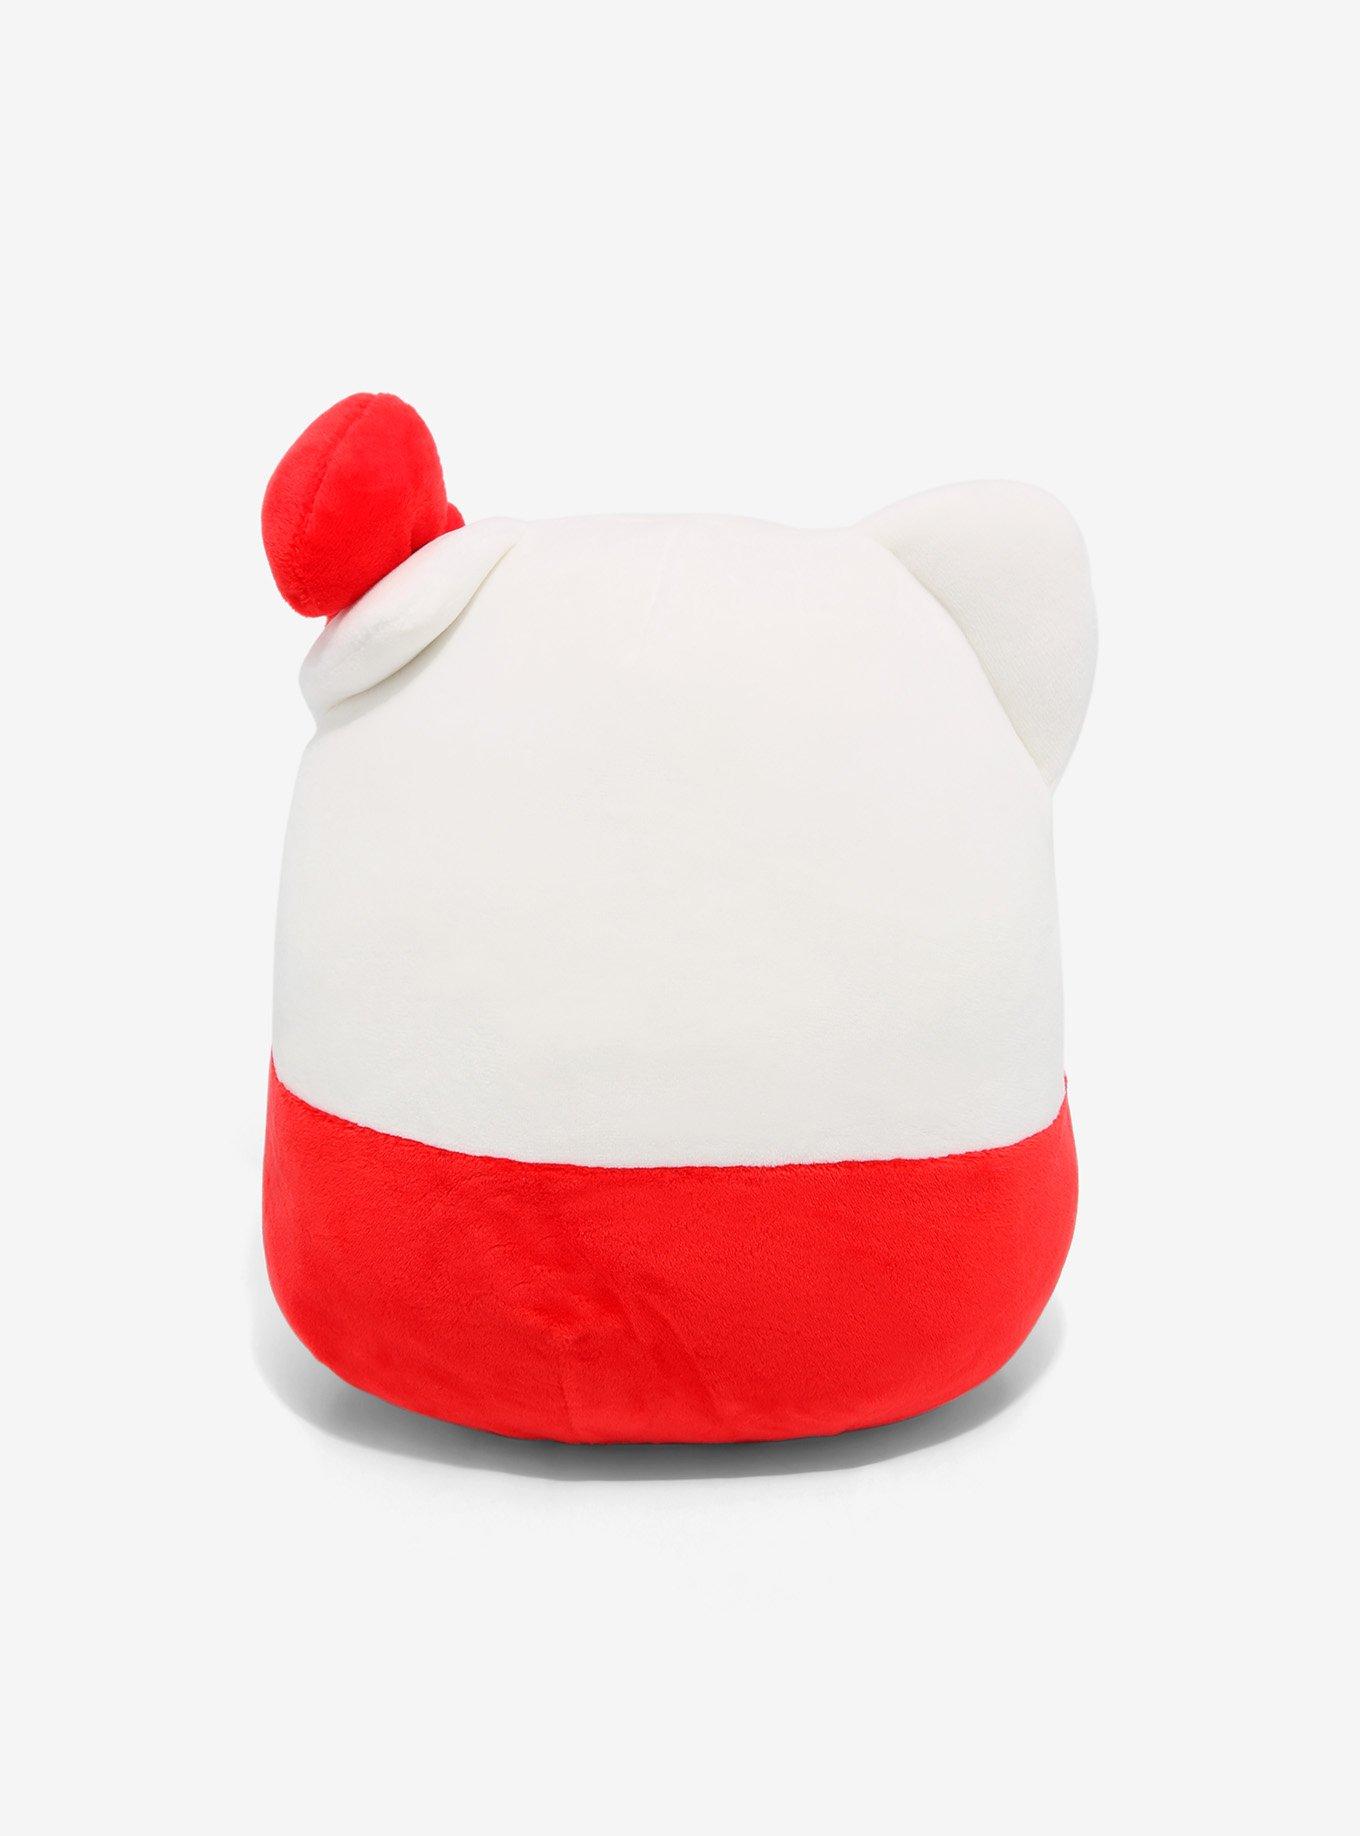 Squishmallows Hello Kitty With Boba Plush Hot Topic Exclusive | Hot Topic